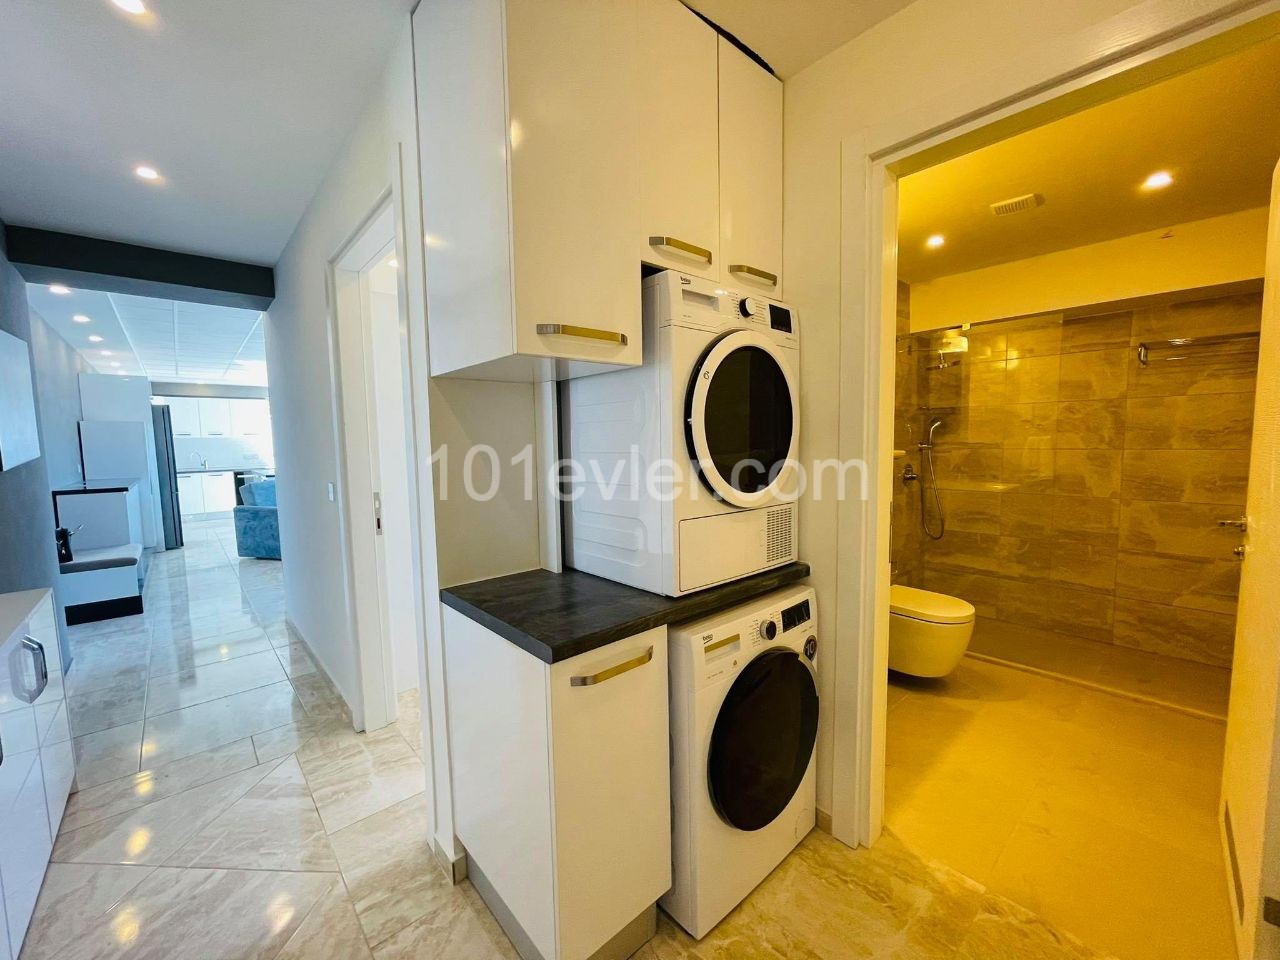 105 M2 LUXURIOUS NEW FURNISHED VERY SPECIAL FLAT IN THE CENTER OF CYPRUS KYRENIA ** 